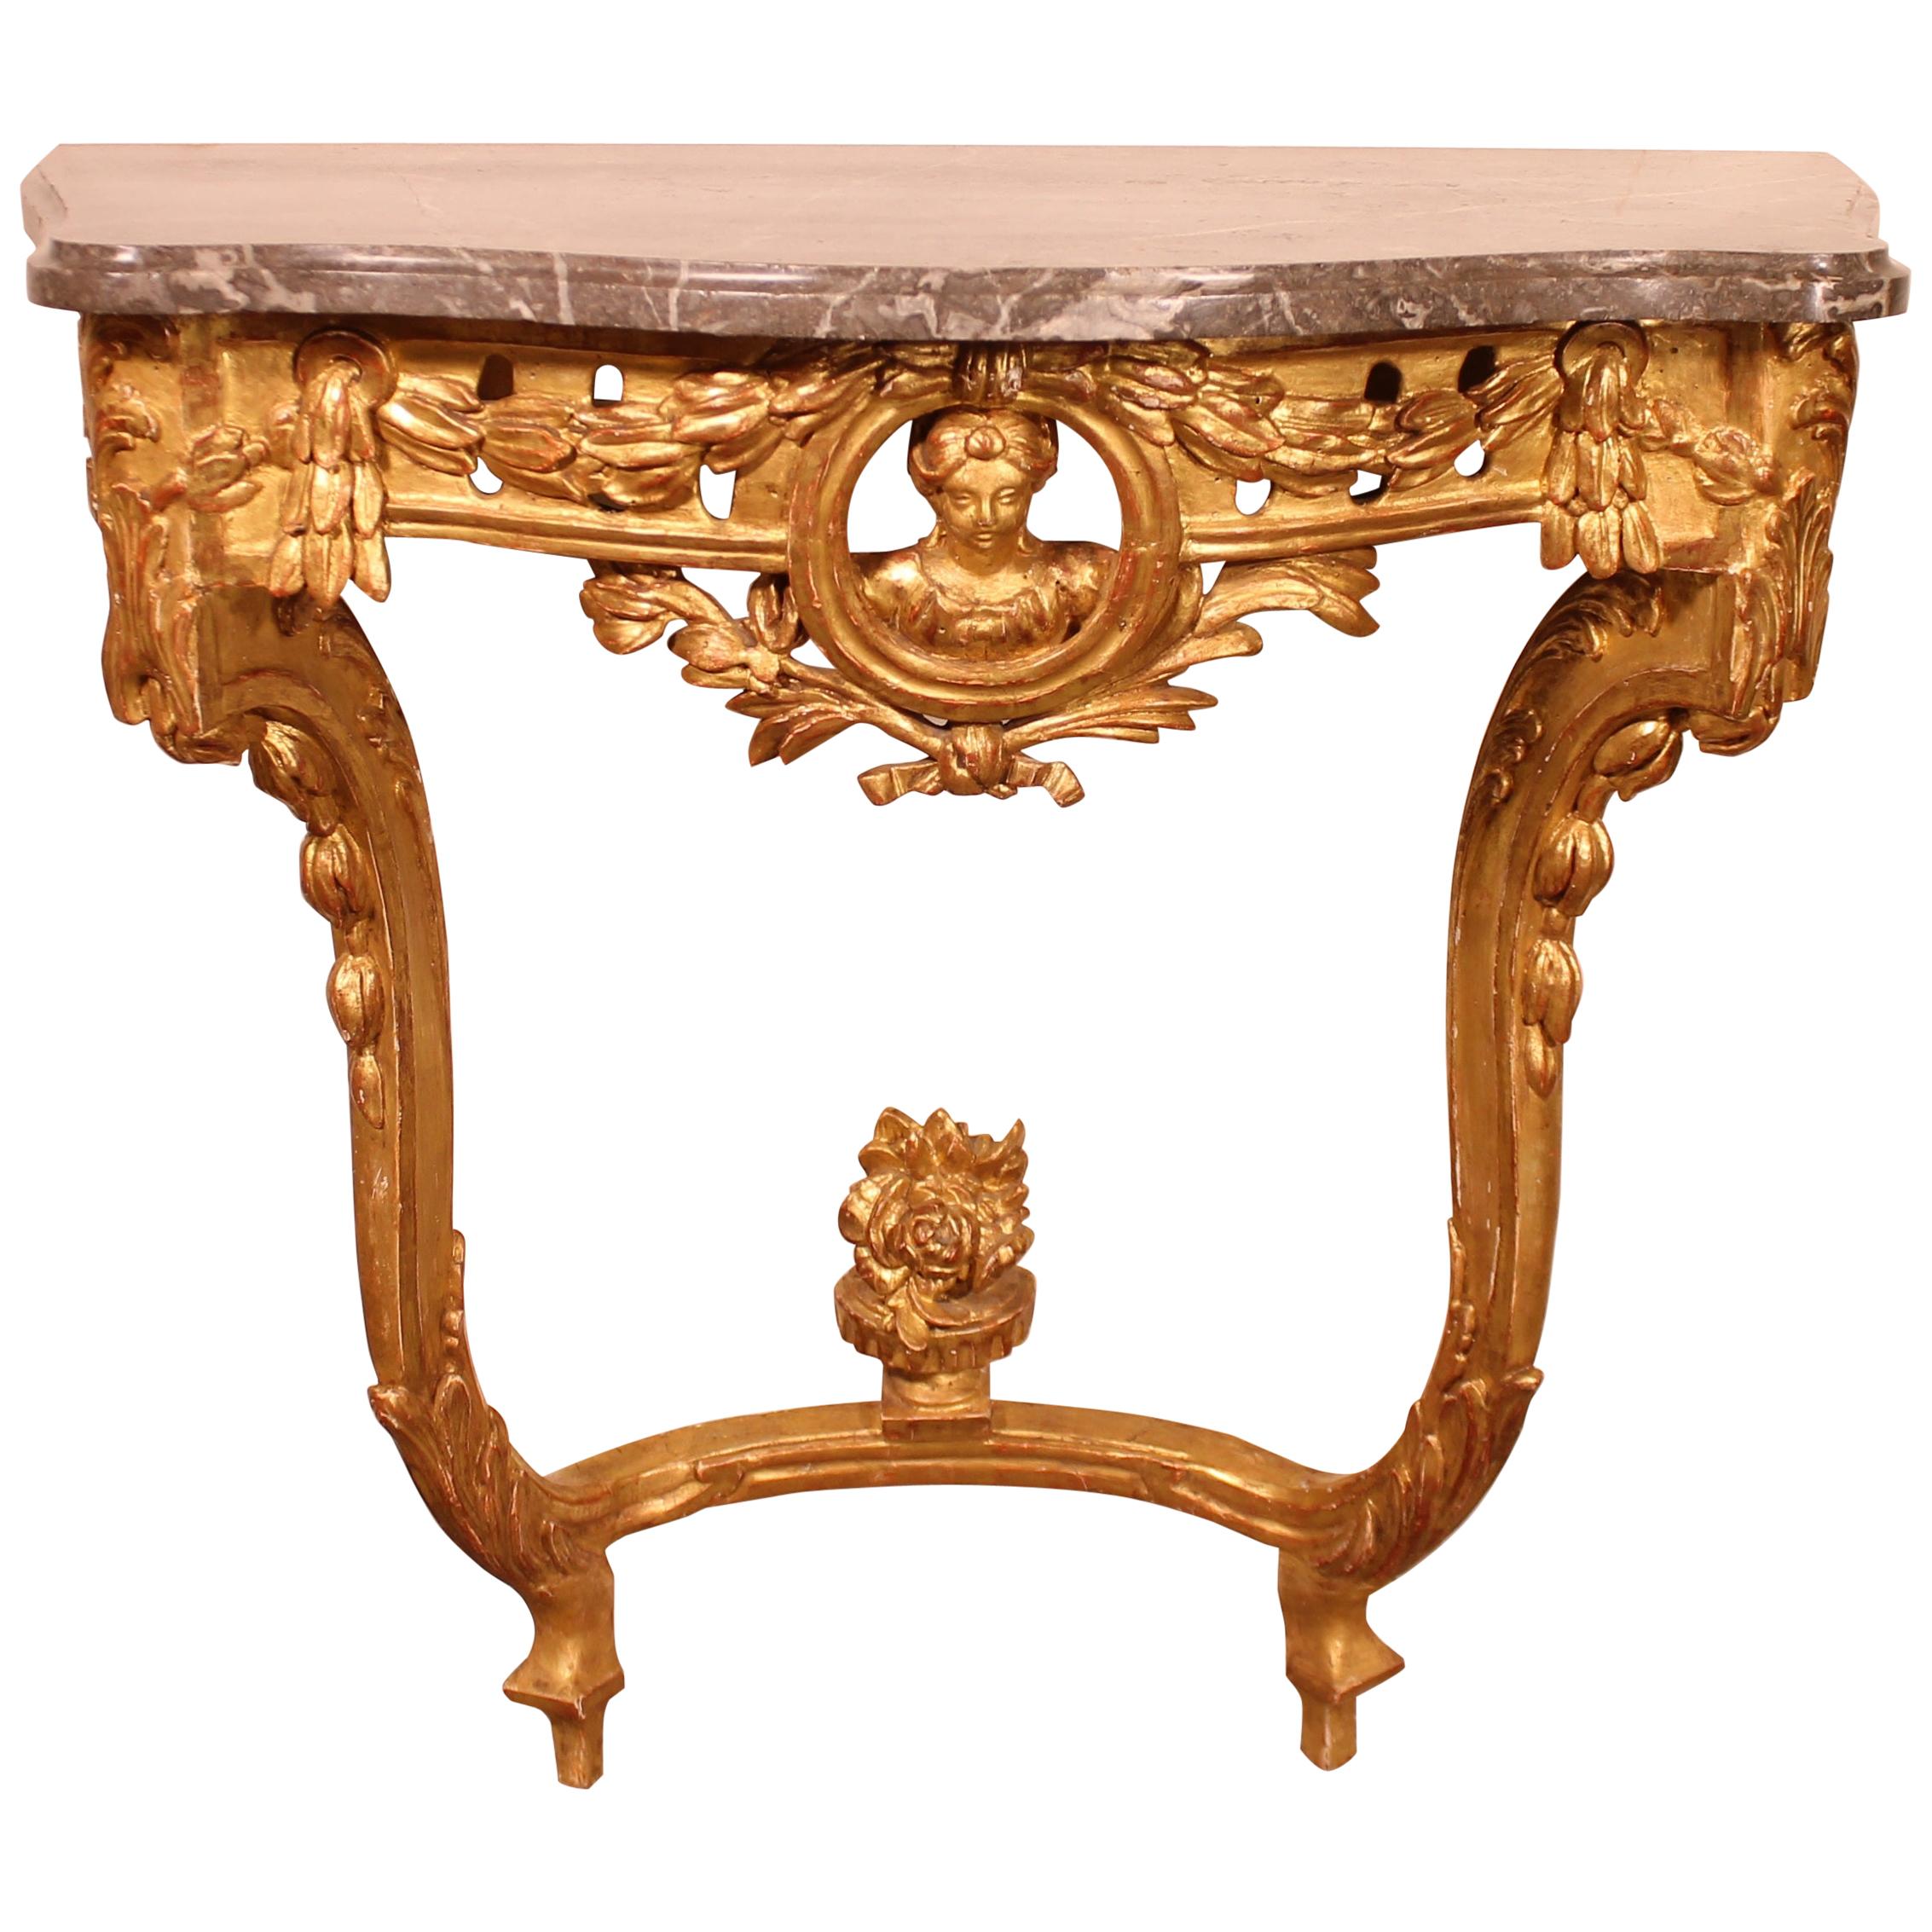 Giltwood Console from the 18th Century, Transition Period 'Louis XV-Louis XVI'